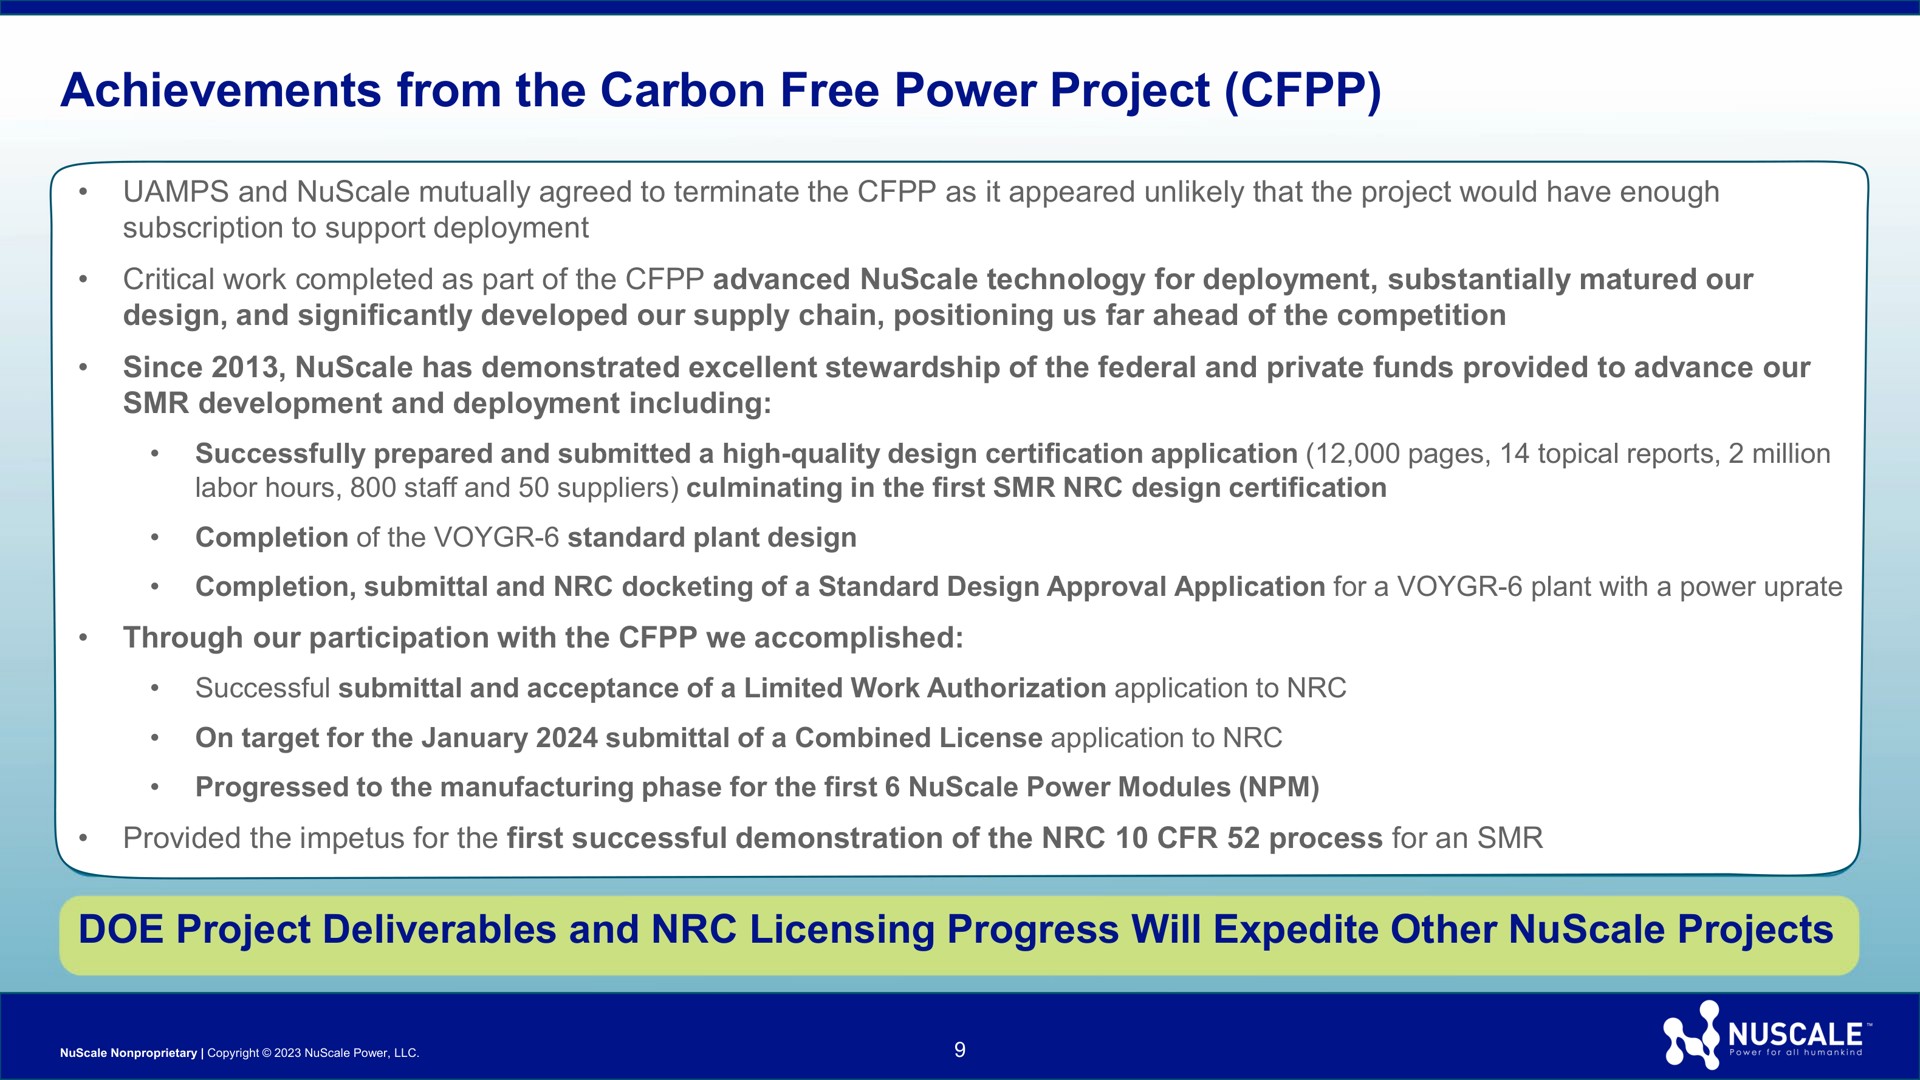 achievements from the carbon free power project doe deliverables and licensing progress will expedite other projects | Nuscale